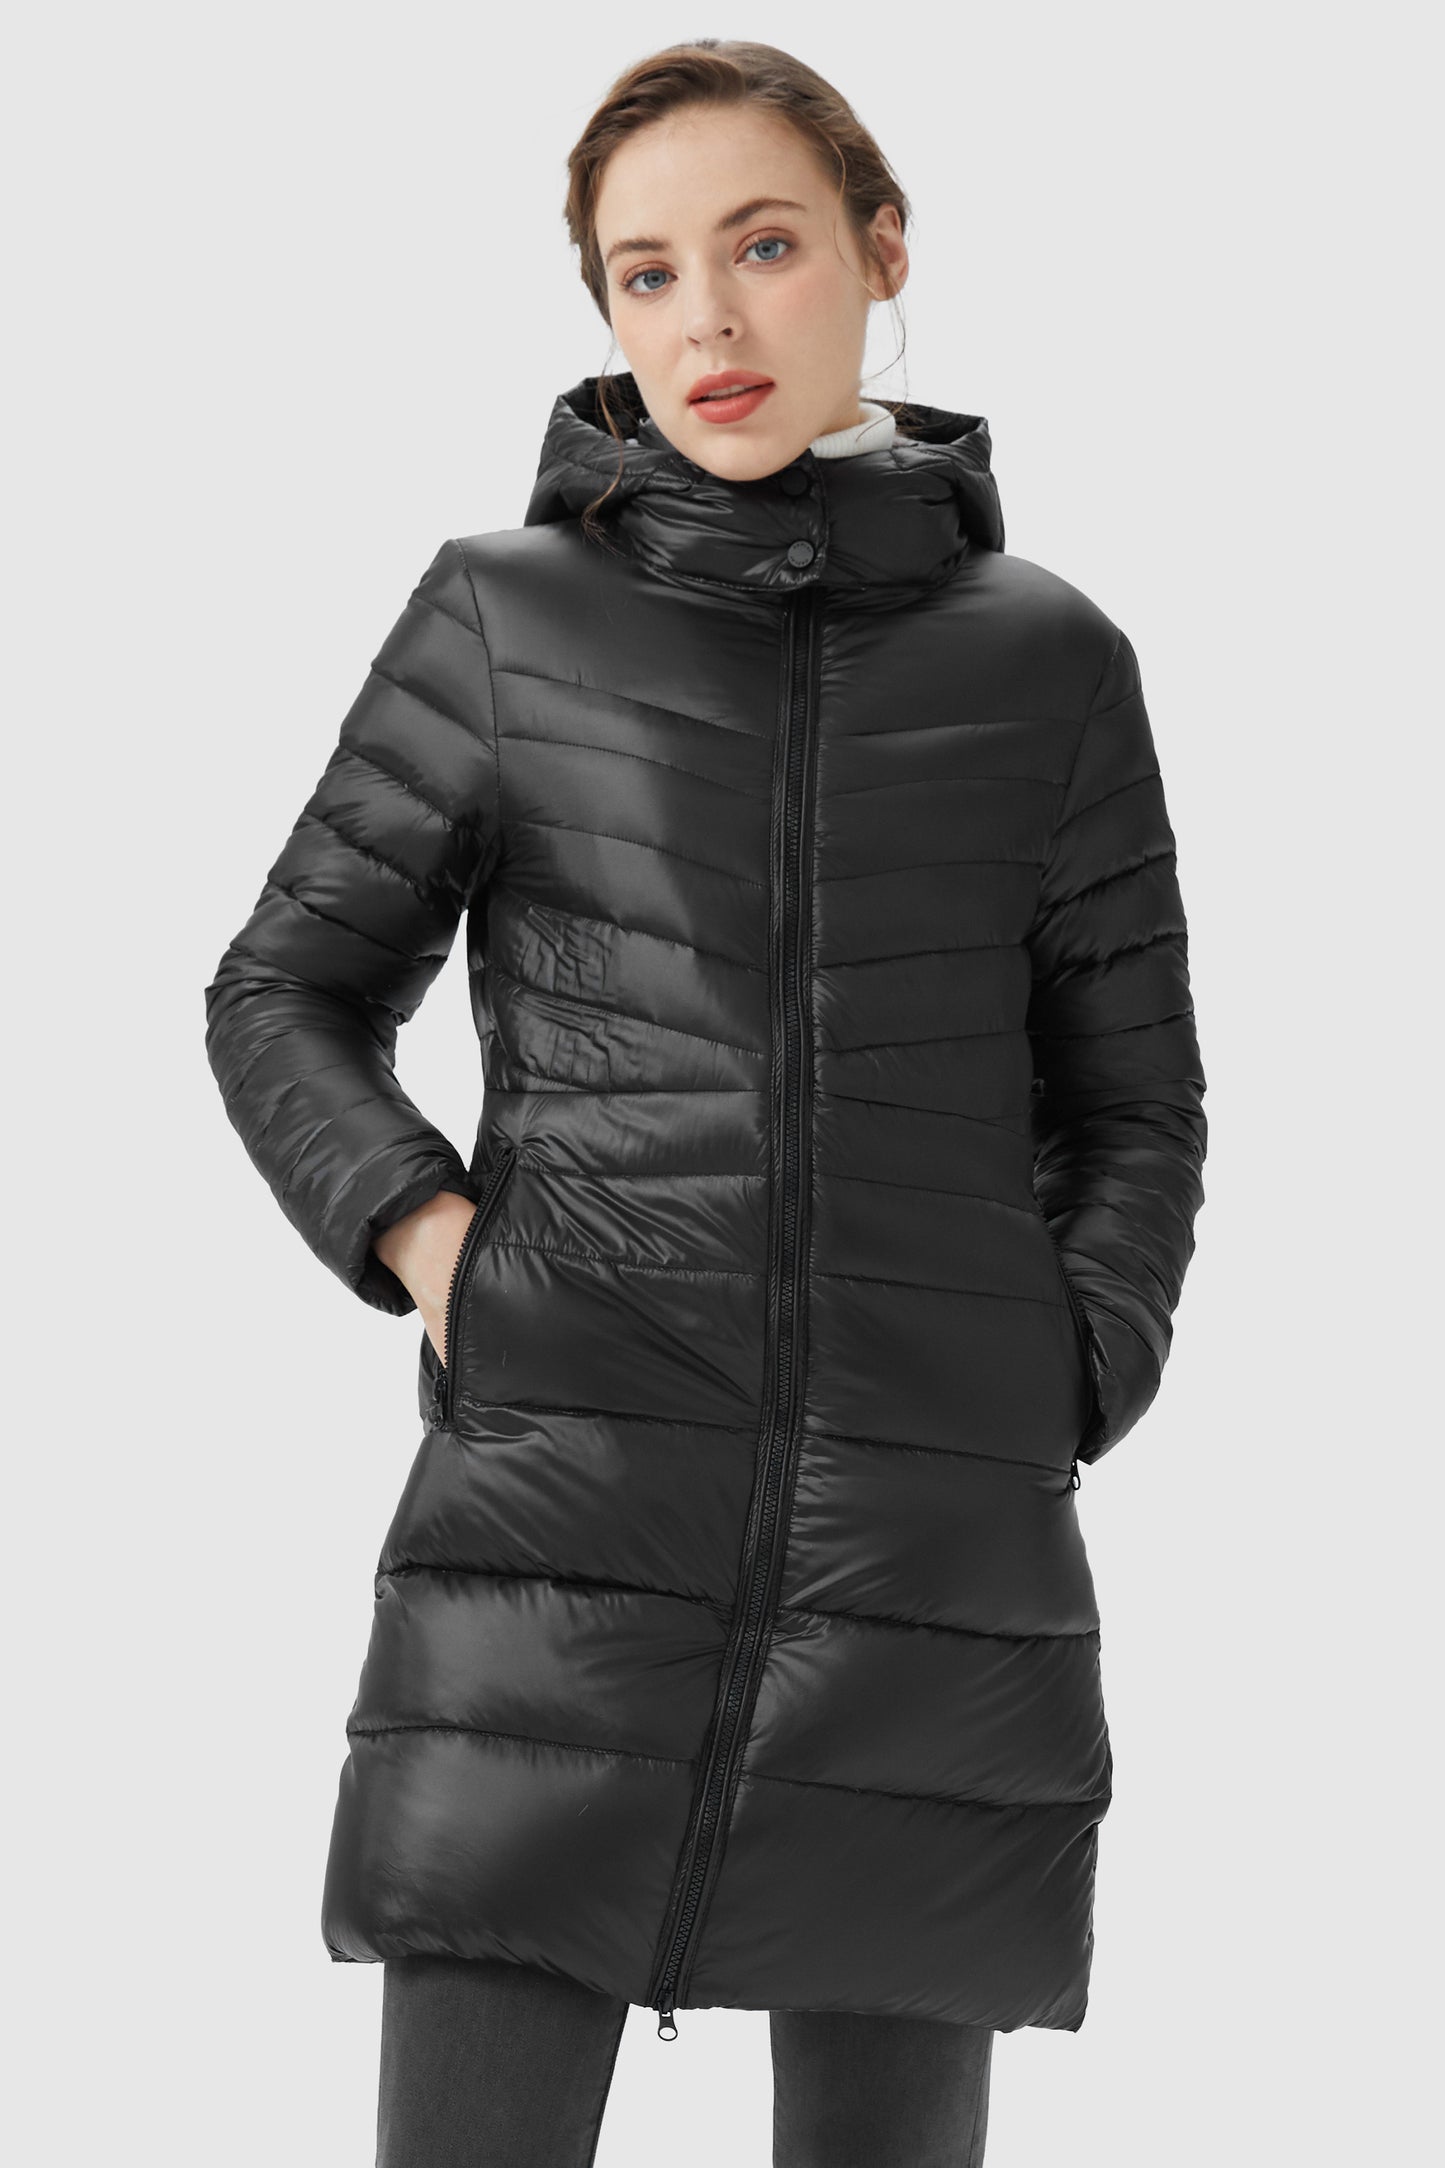 Long Glossy Easy to Carry Light Down Jacket